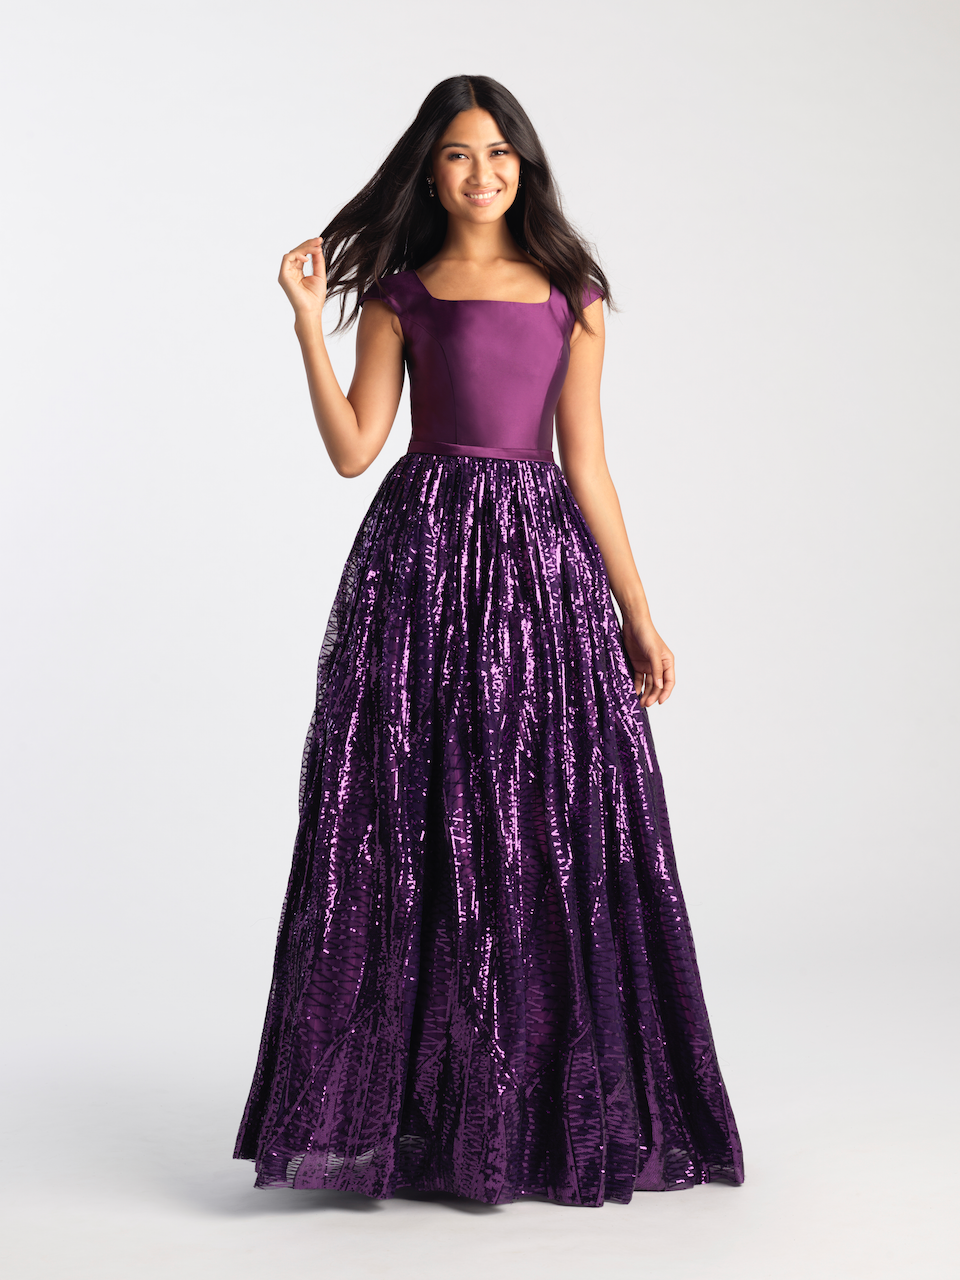 Conservative Ball Gowns Shop, 52% OFF ...